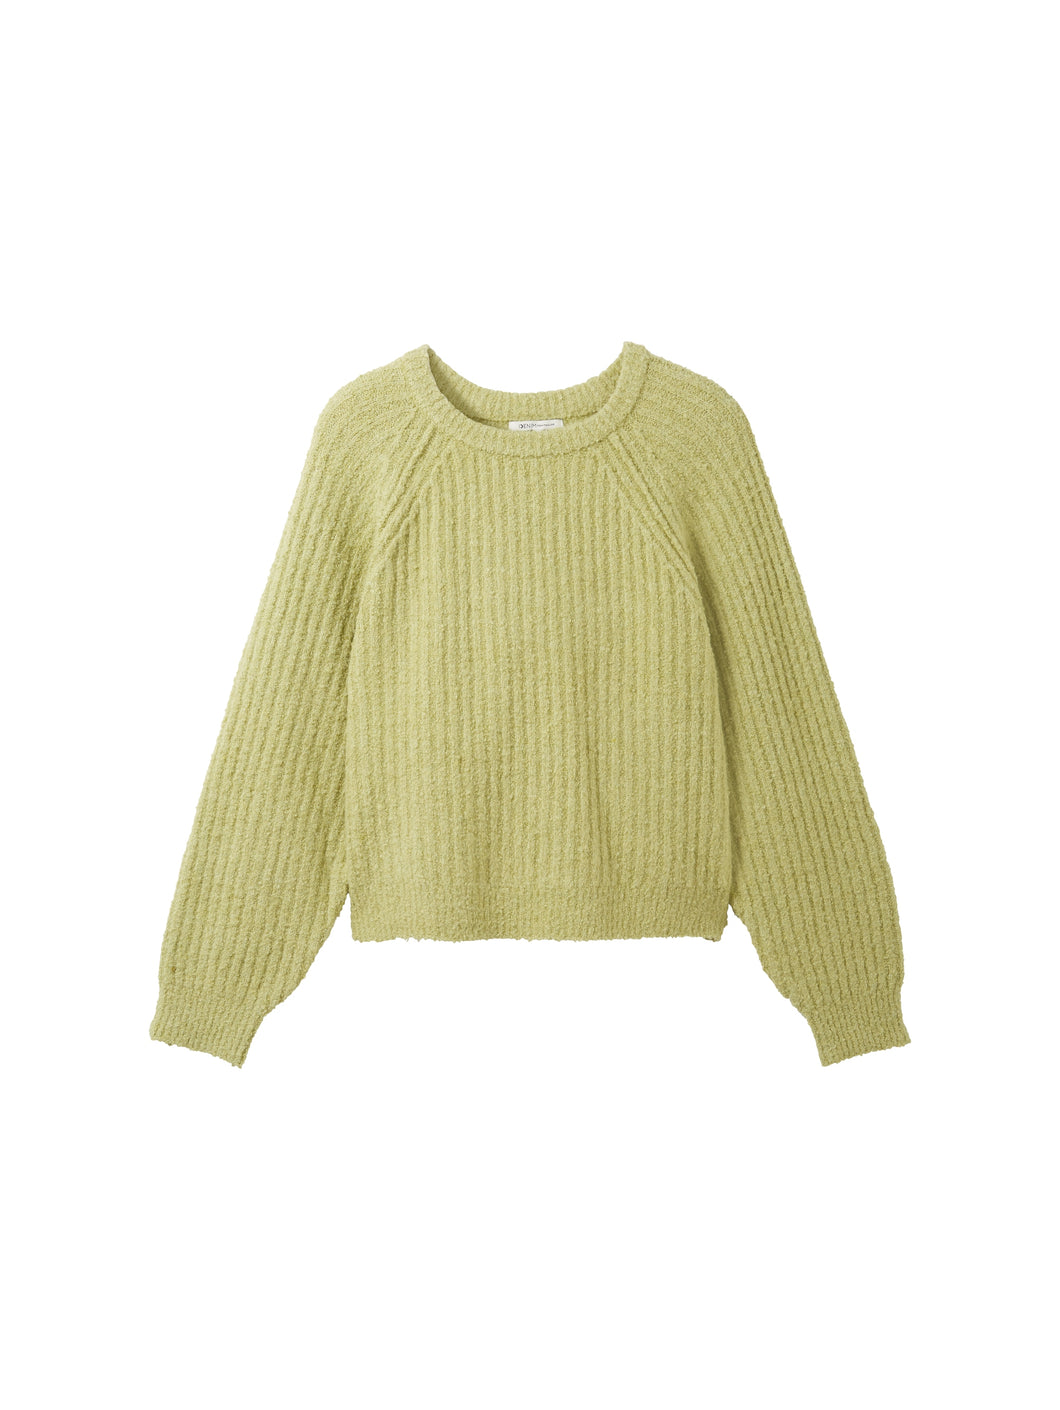 TOM TAILOR DENIM RELAXED CREW NECK dusty pear green